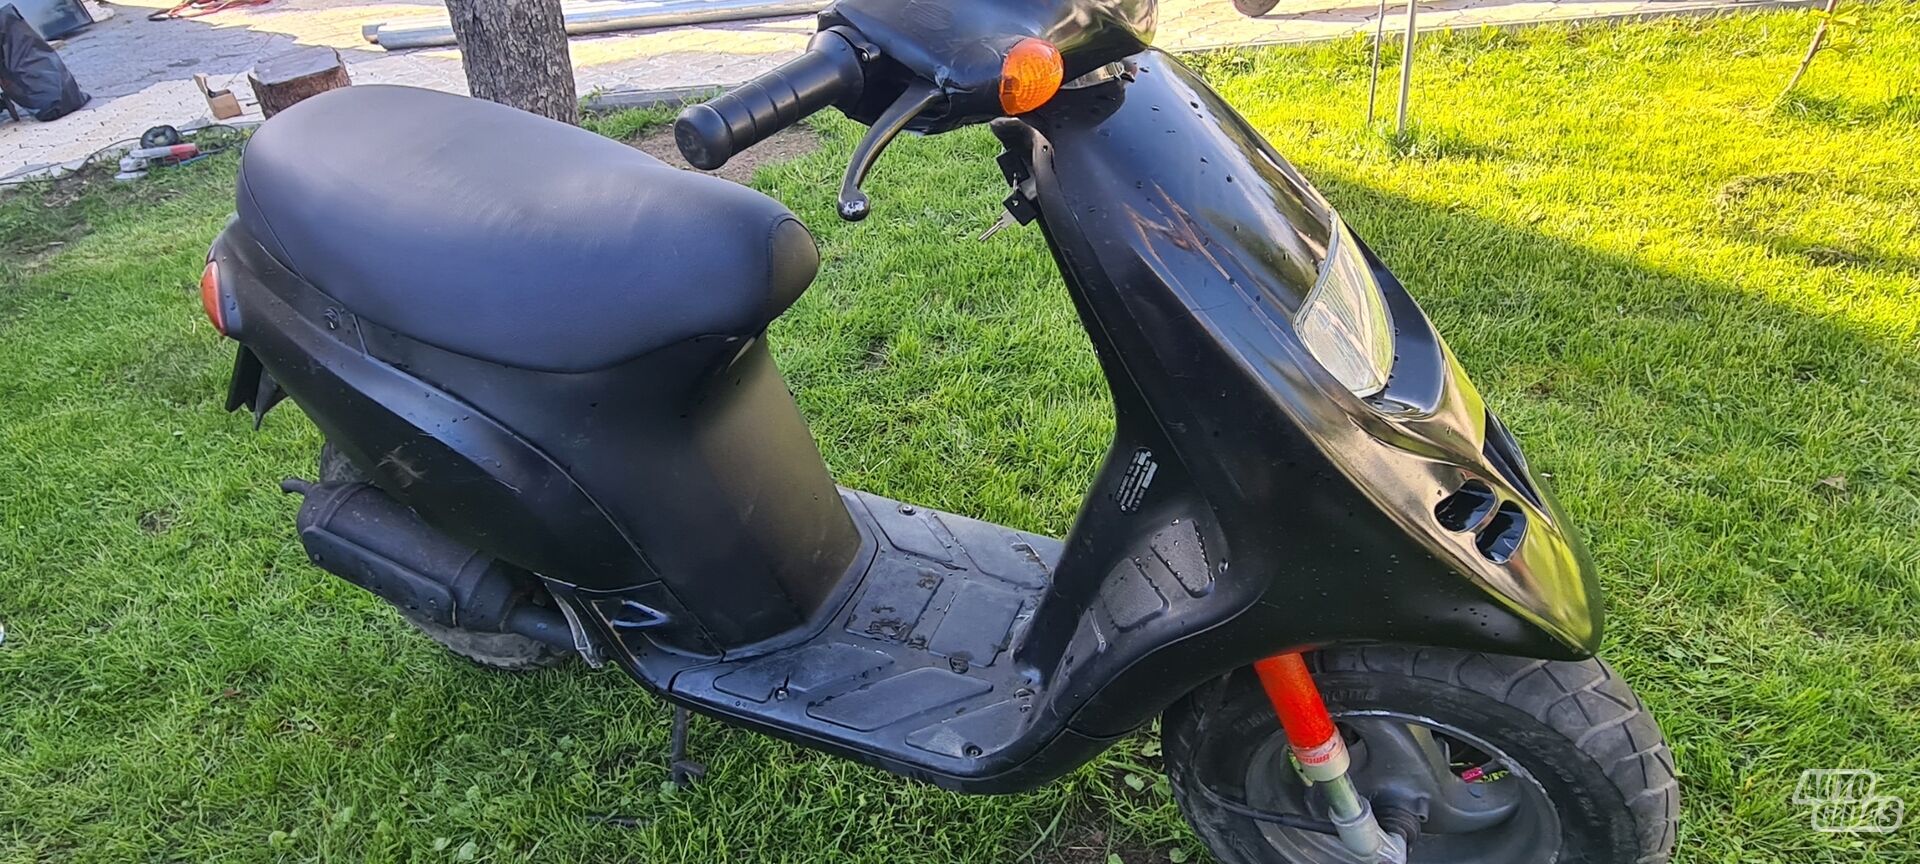 Piaggio Typhoon 1994 y Scooter / moped